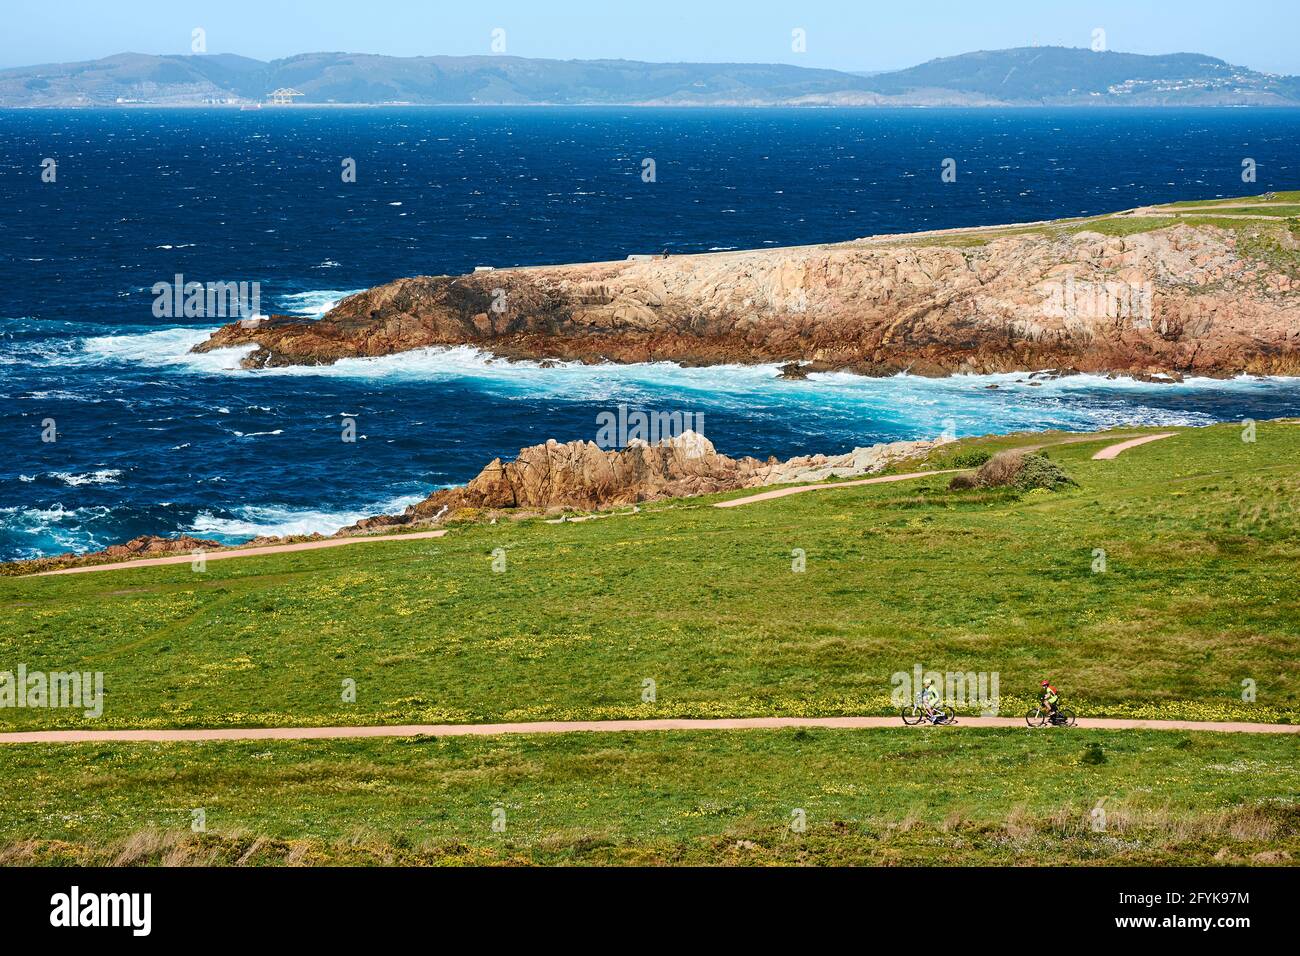 Two cyclists riding their bikes on path near the Tower of Hercules in Coruña, Spain, surrounded by green grass and flowers with view of the coastline Stock Photo